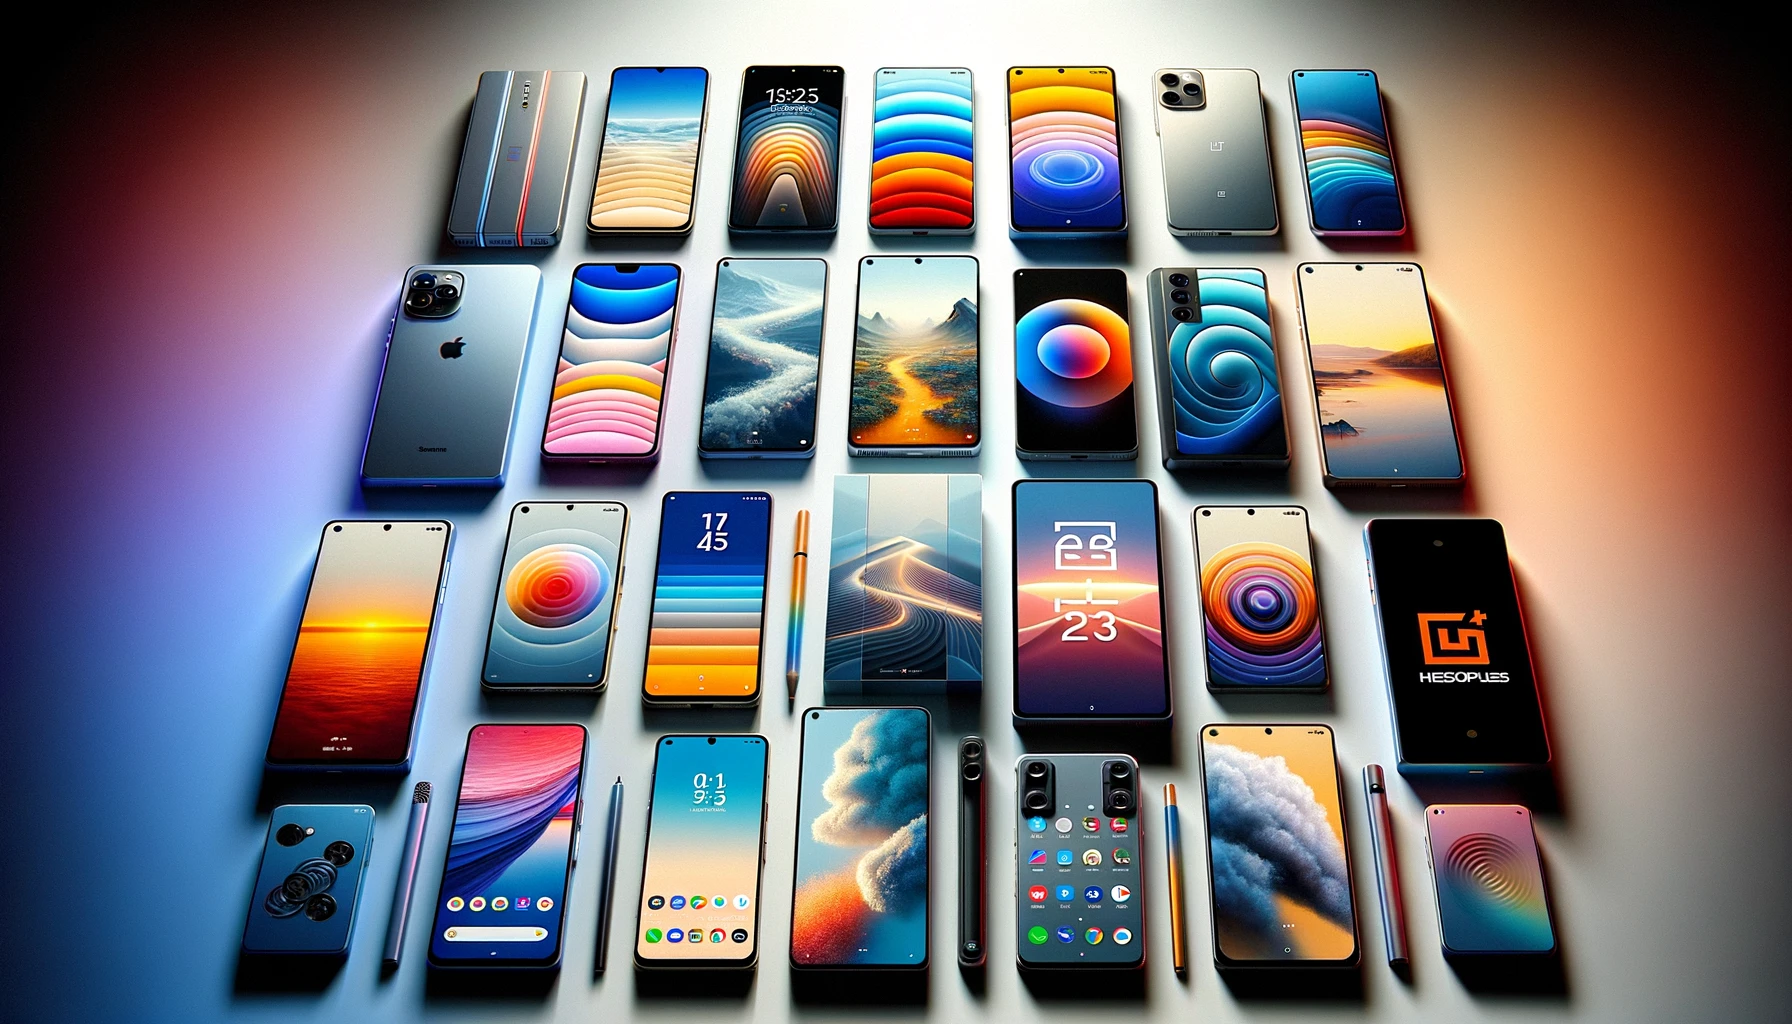 A collage of the top mobile devices of 2024, featuring sleek, modern smartphones with vibrant displays and distinctive designs.